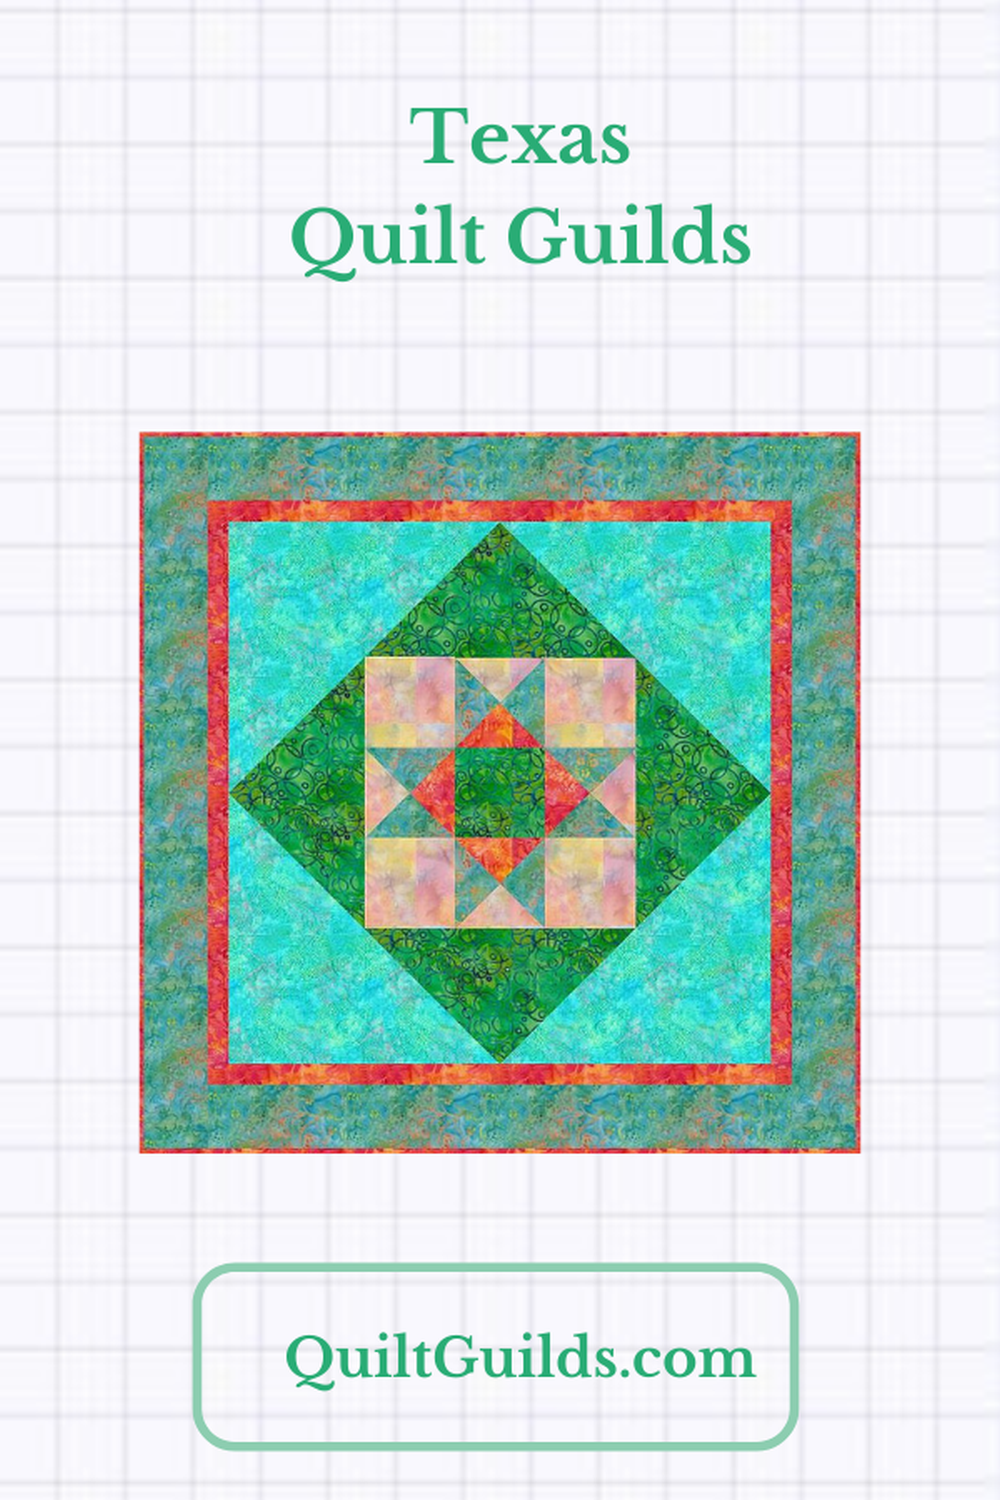 Graphic for Texas-Quilt-Guilds